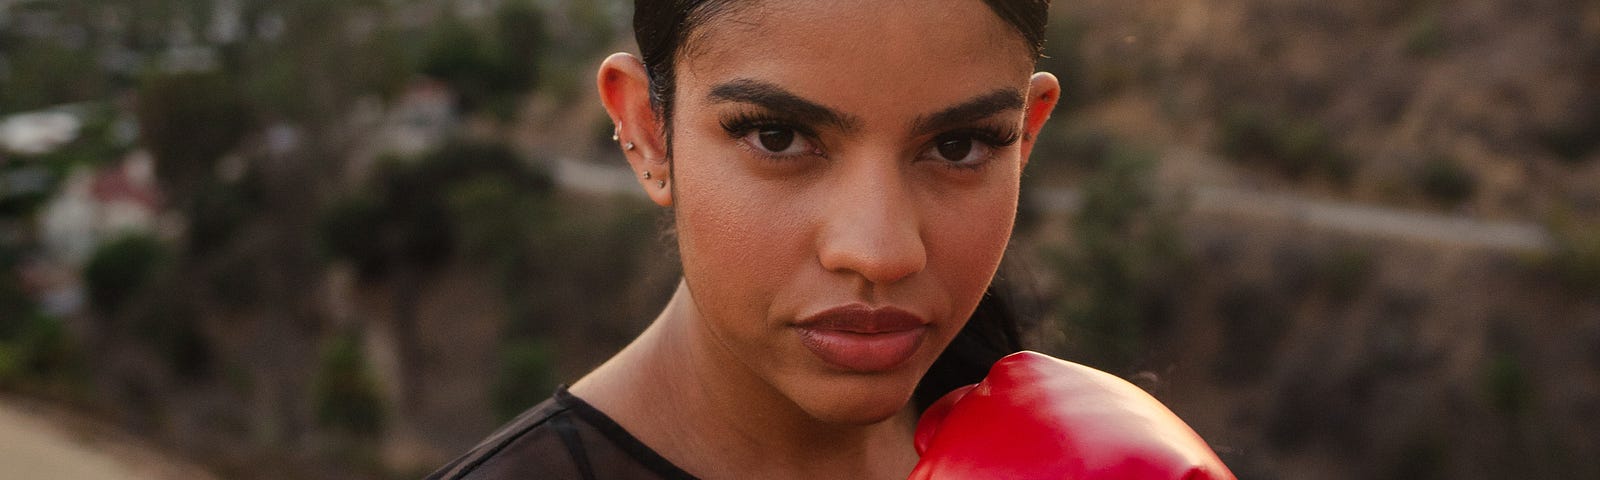 A powerful woman boxing with red cloves